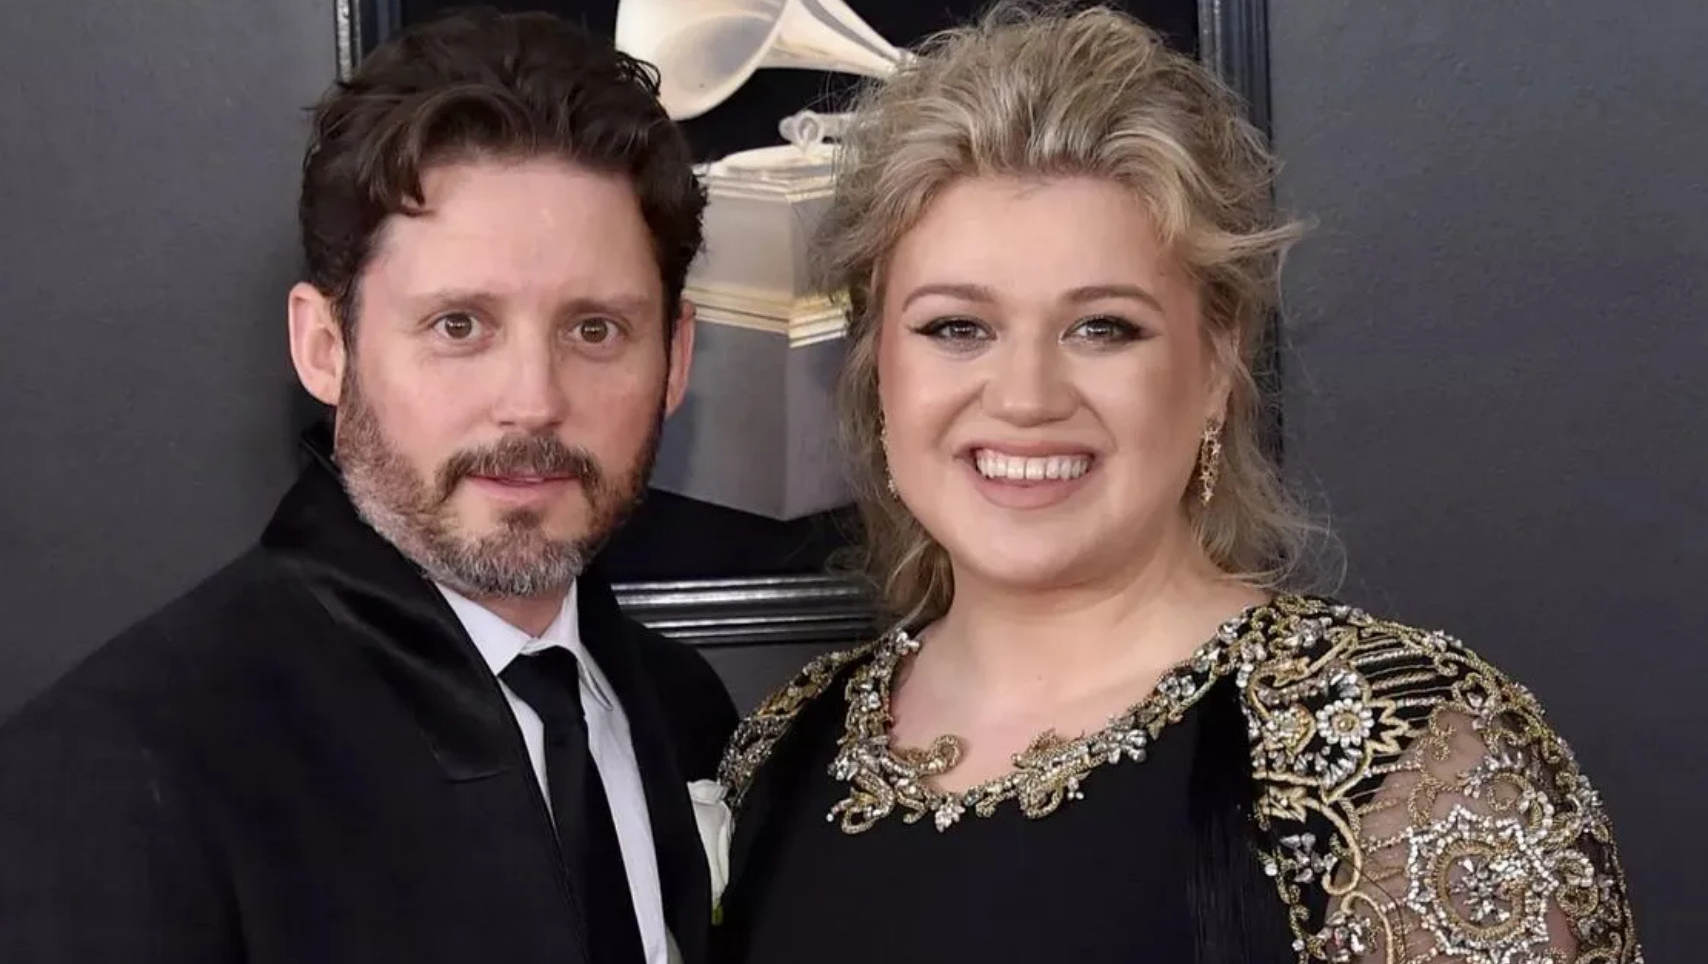 Kelly Clarkson Fights Back At Ex-Manager’s $1.4 Million Lawsuit